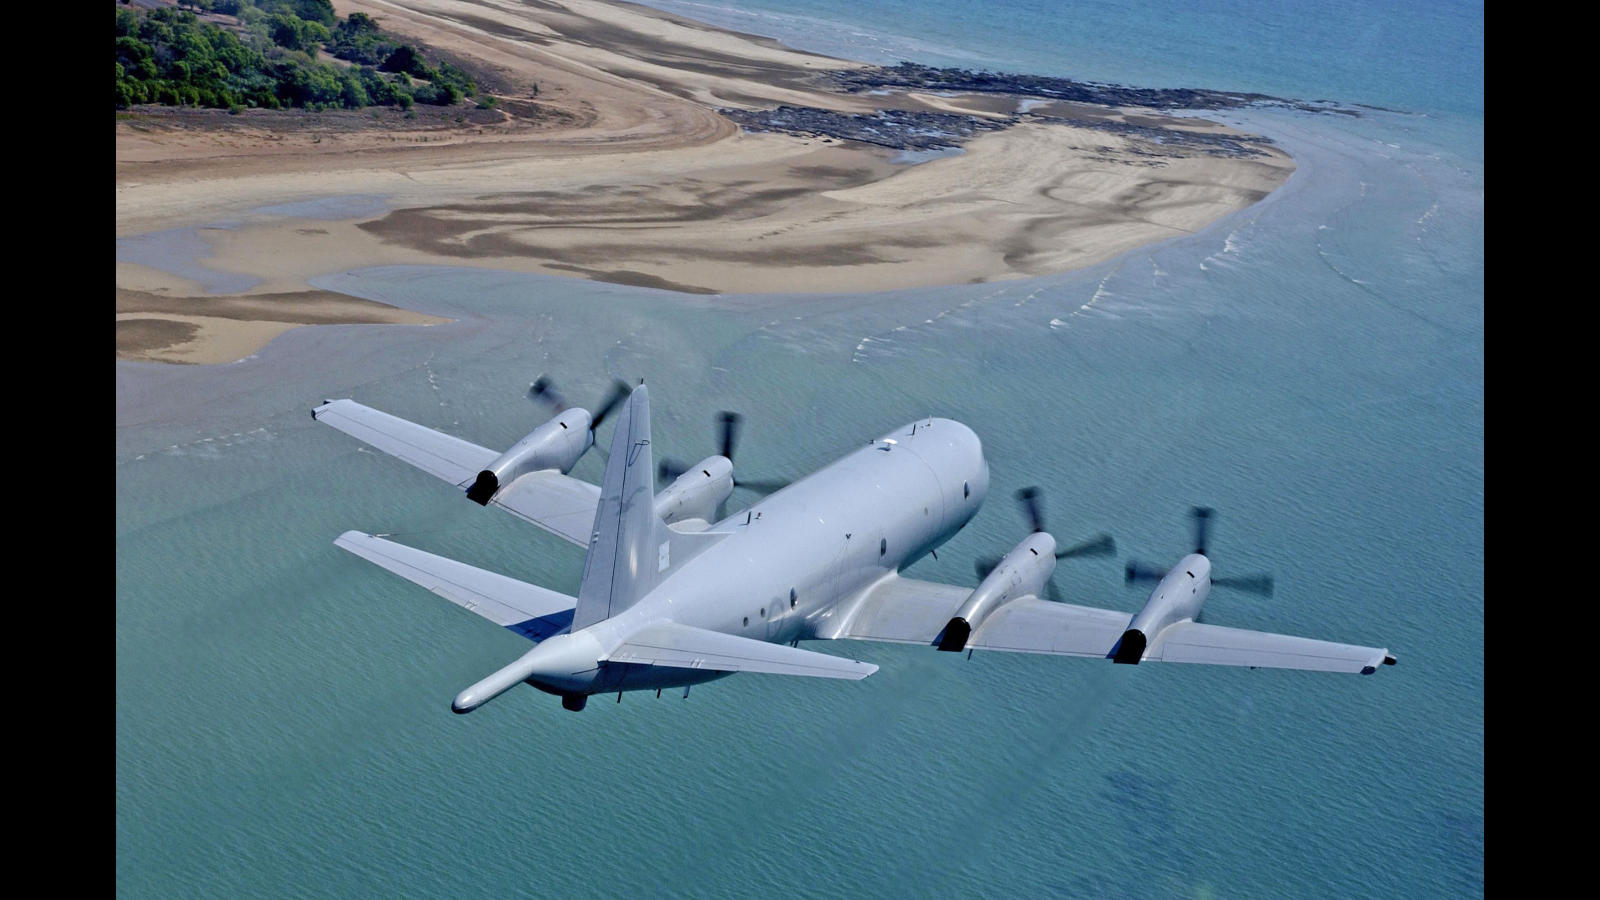 Pictured: 92 Wing AP-3C Orion surveillance aircraft over Darwin. 92 Wing deployed 3 x AP-3C Orion aircraft to Darwin for Exercise Kakadu VII. Exercise Kakadu VII is a joint exercise off the coast of Darwin and involves Navies and Airforces from Australia, New Zealand, Singapore, Malaysia, Papua New Guinea, Indonesia and India.